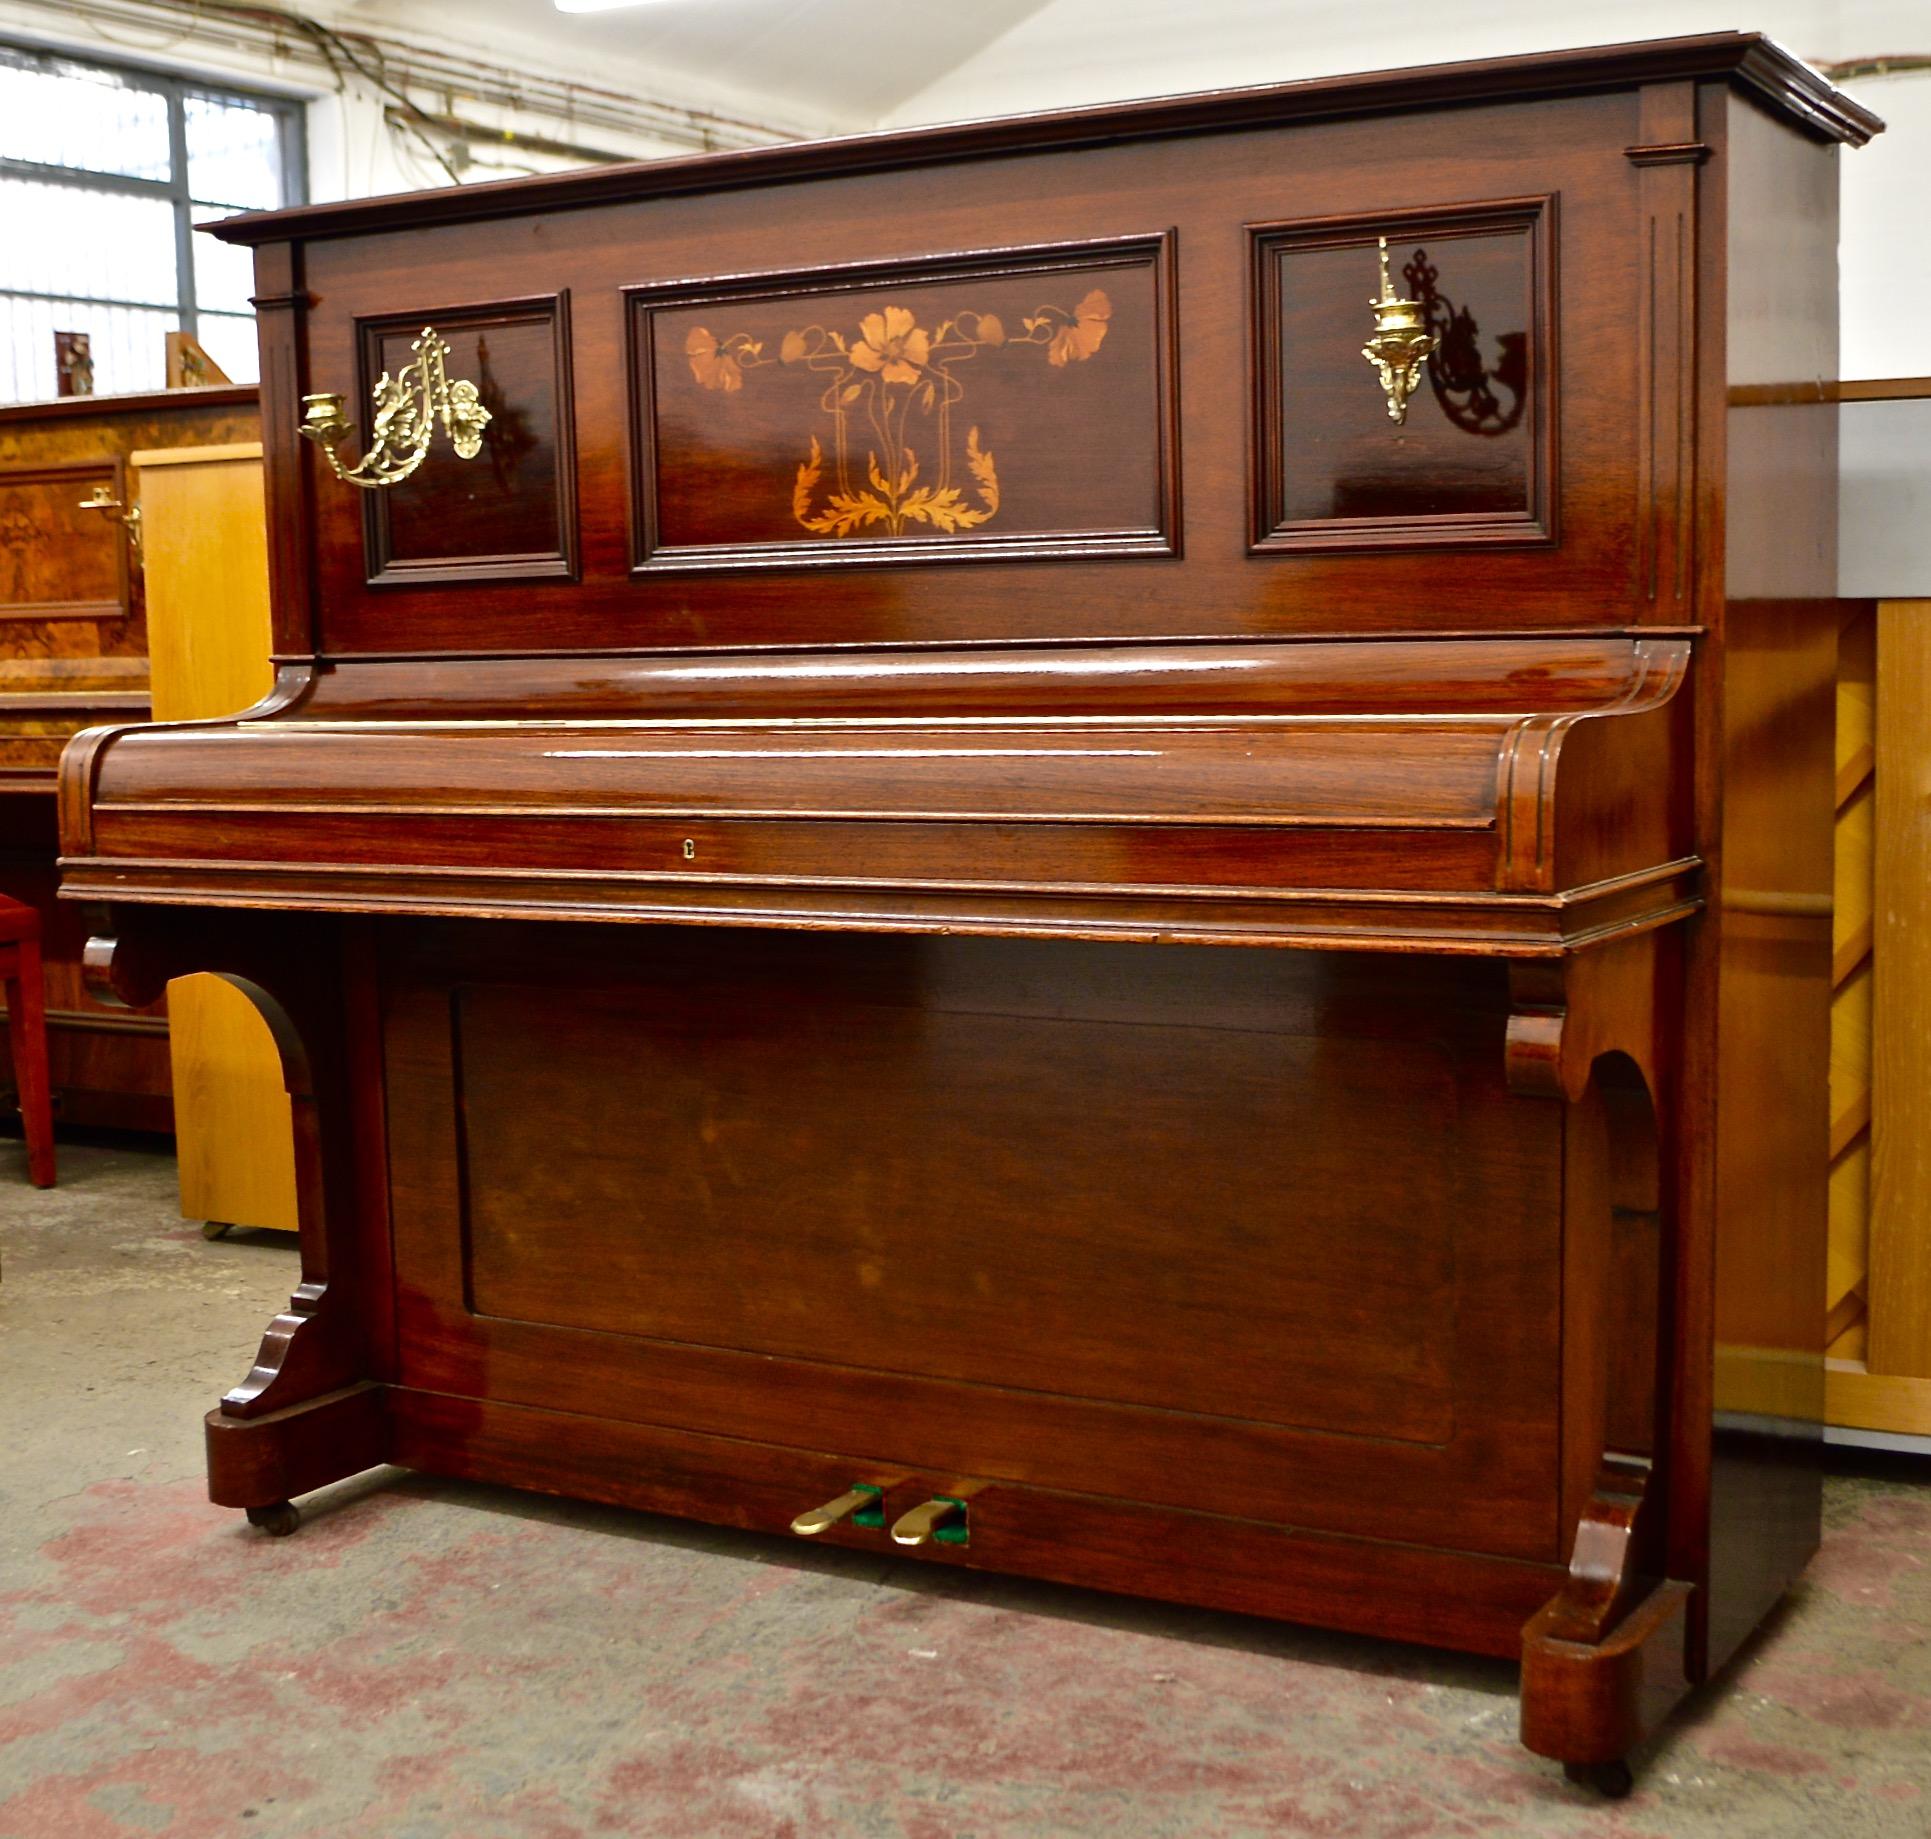 Knauss were a piano maker famous for producing pianos of the highest musical standard and durability. The pianos were made by the finest craftsmen using materials and components that were the pinnacle of musical instrument making, the pianos reflect